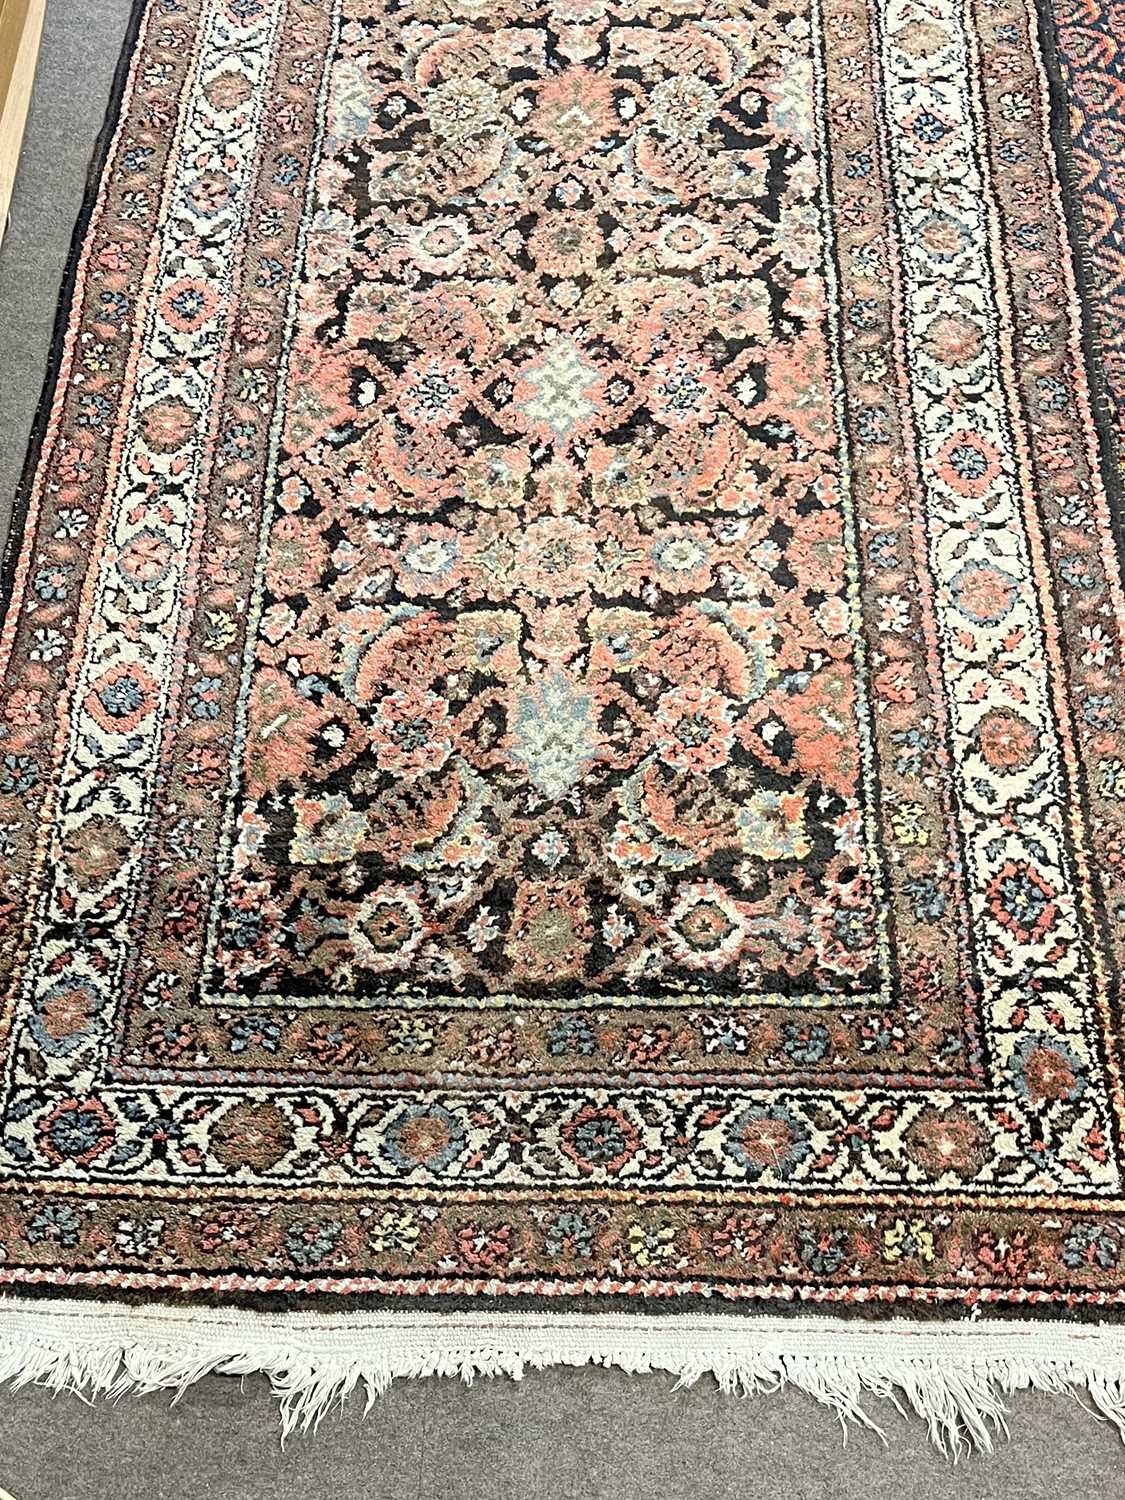 Persian runner carpet with floral pattern 395cm x 98 cm